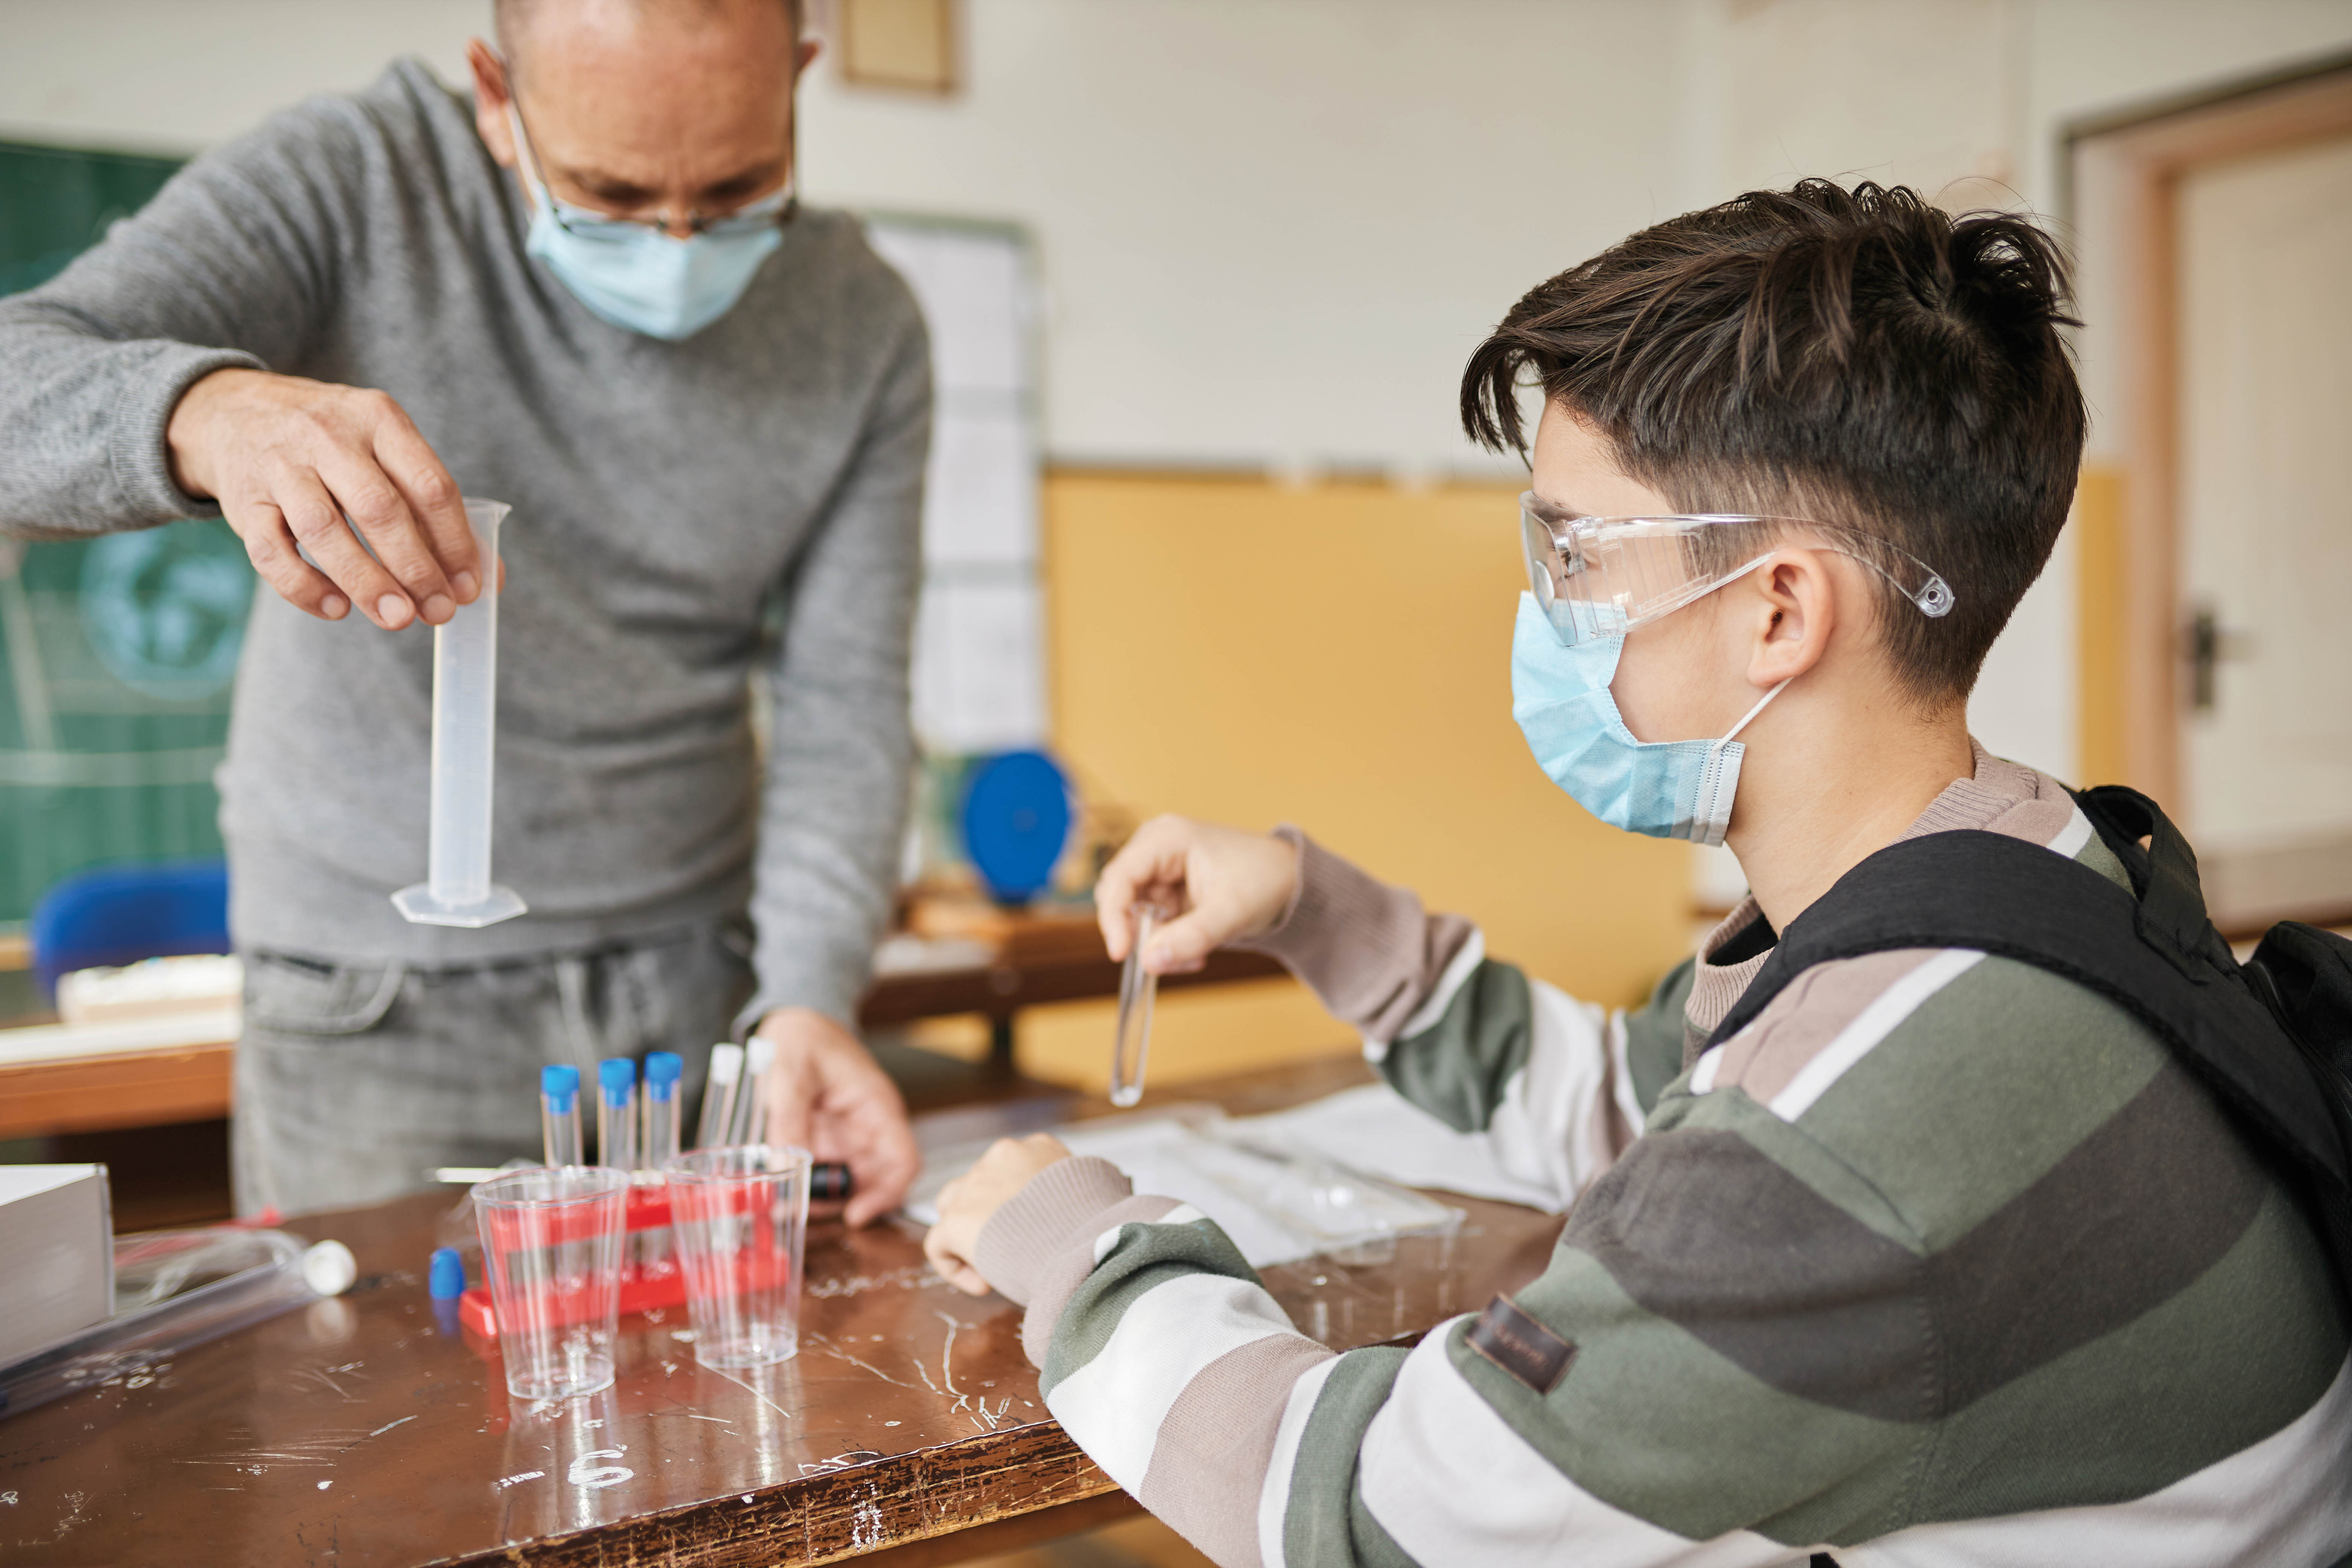 A student and teacher working in a chemistry lab.